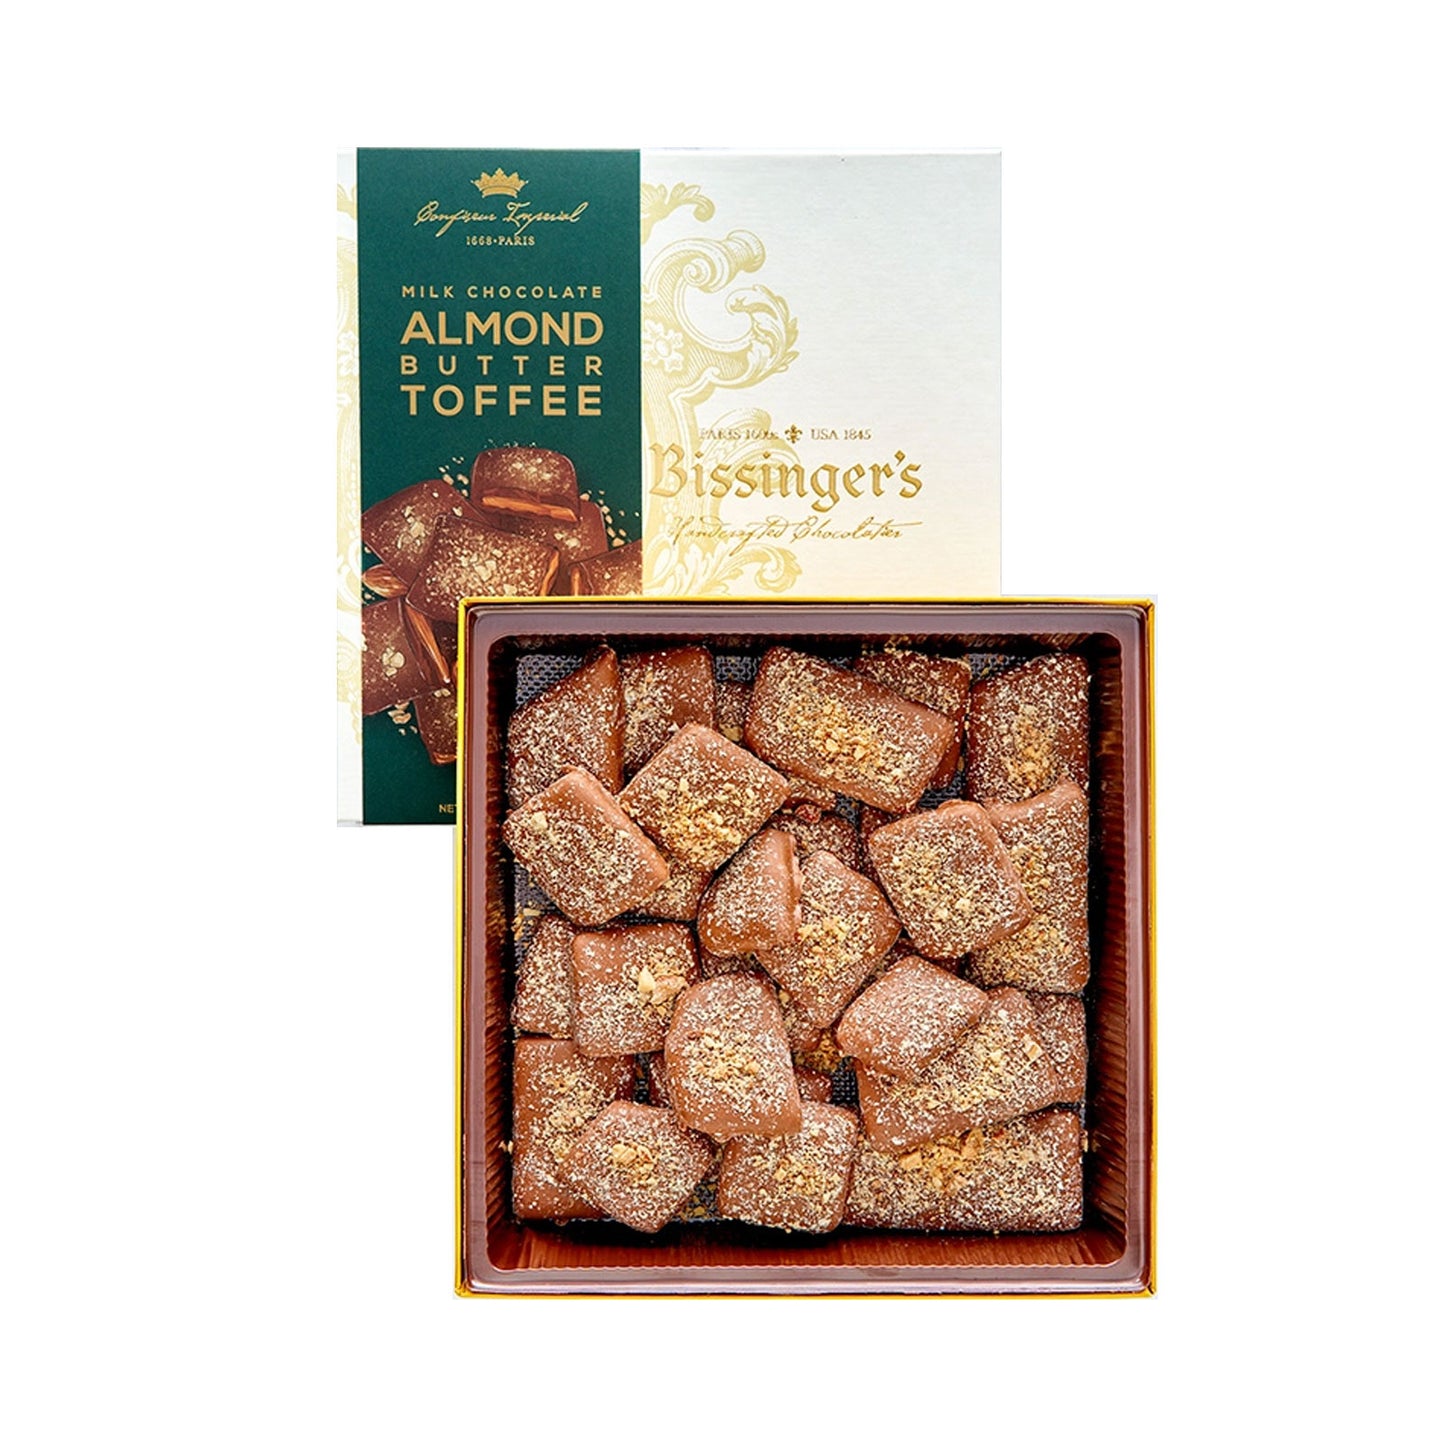 Almond Butter Toffee, 12oz Gift Box